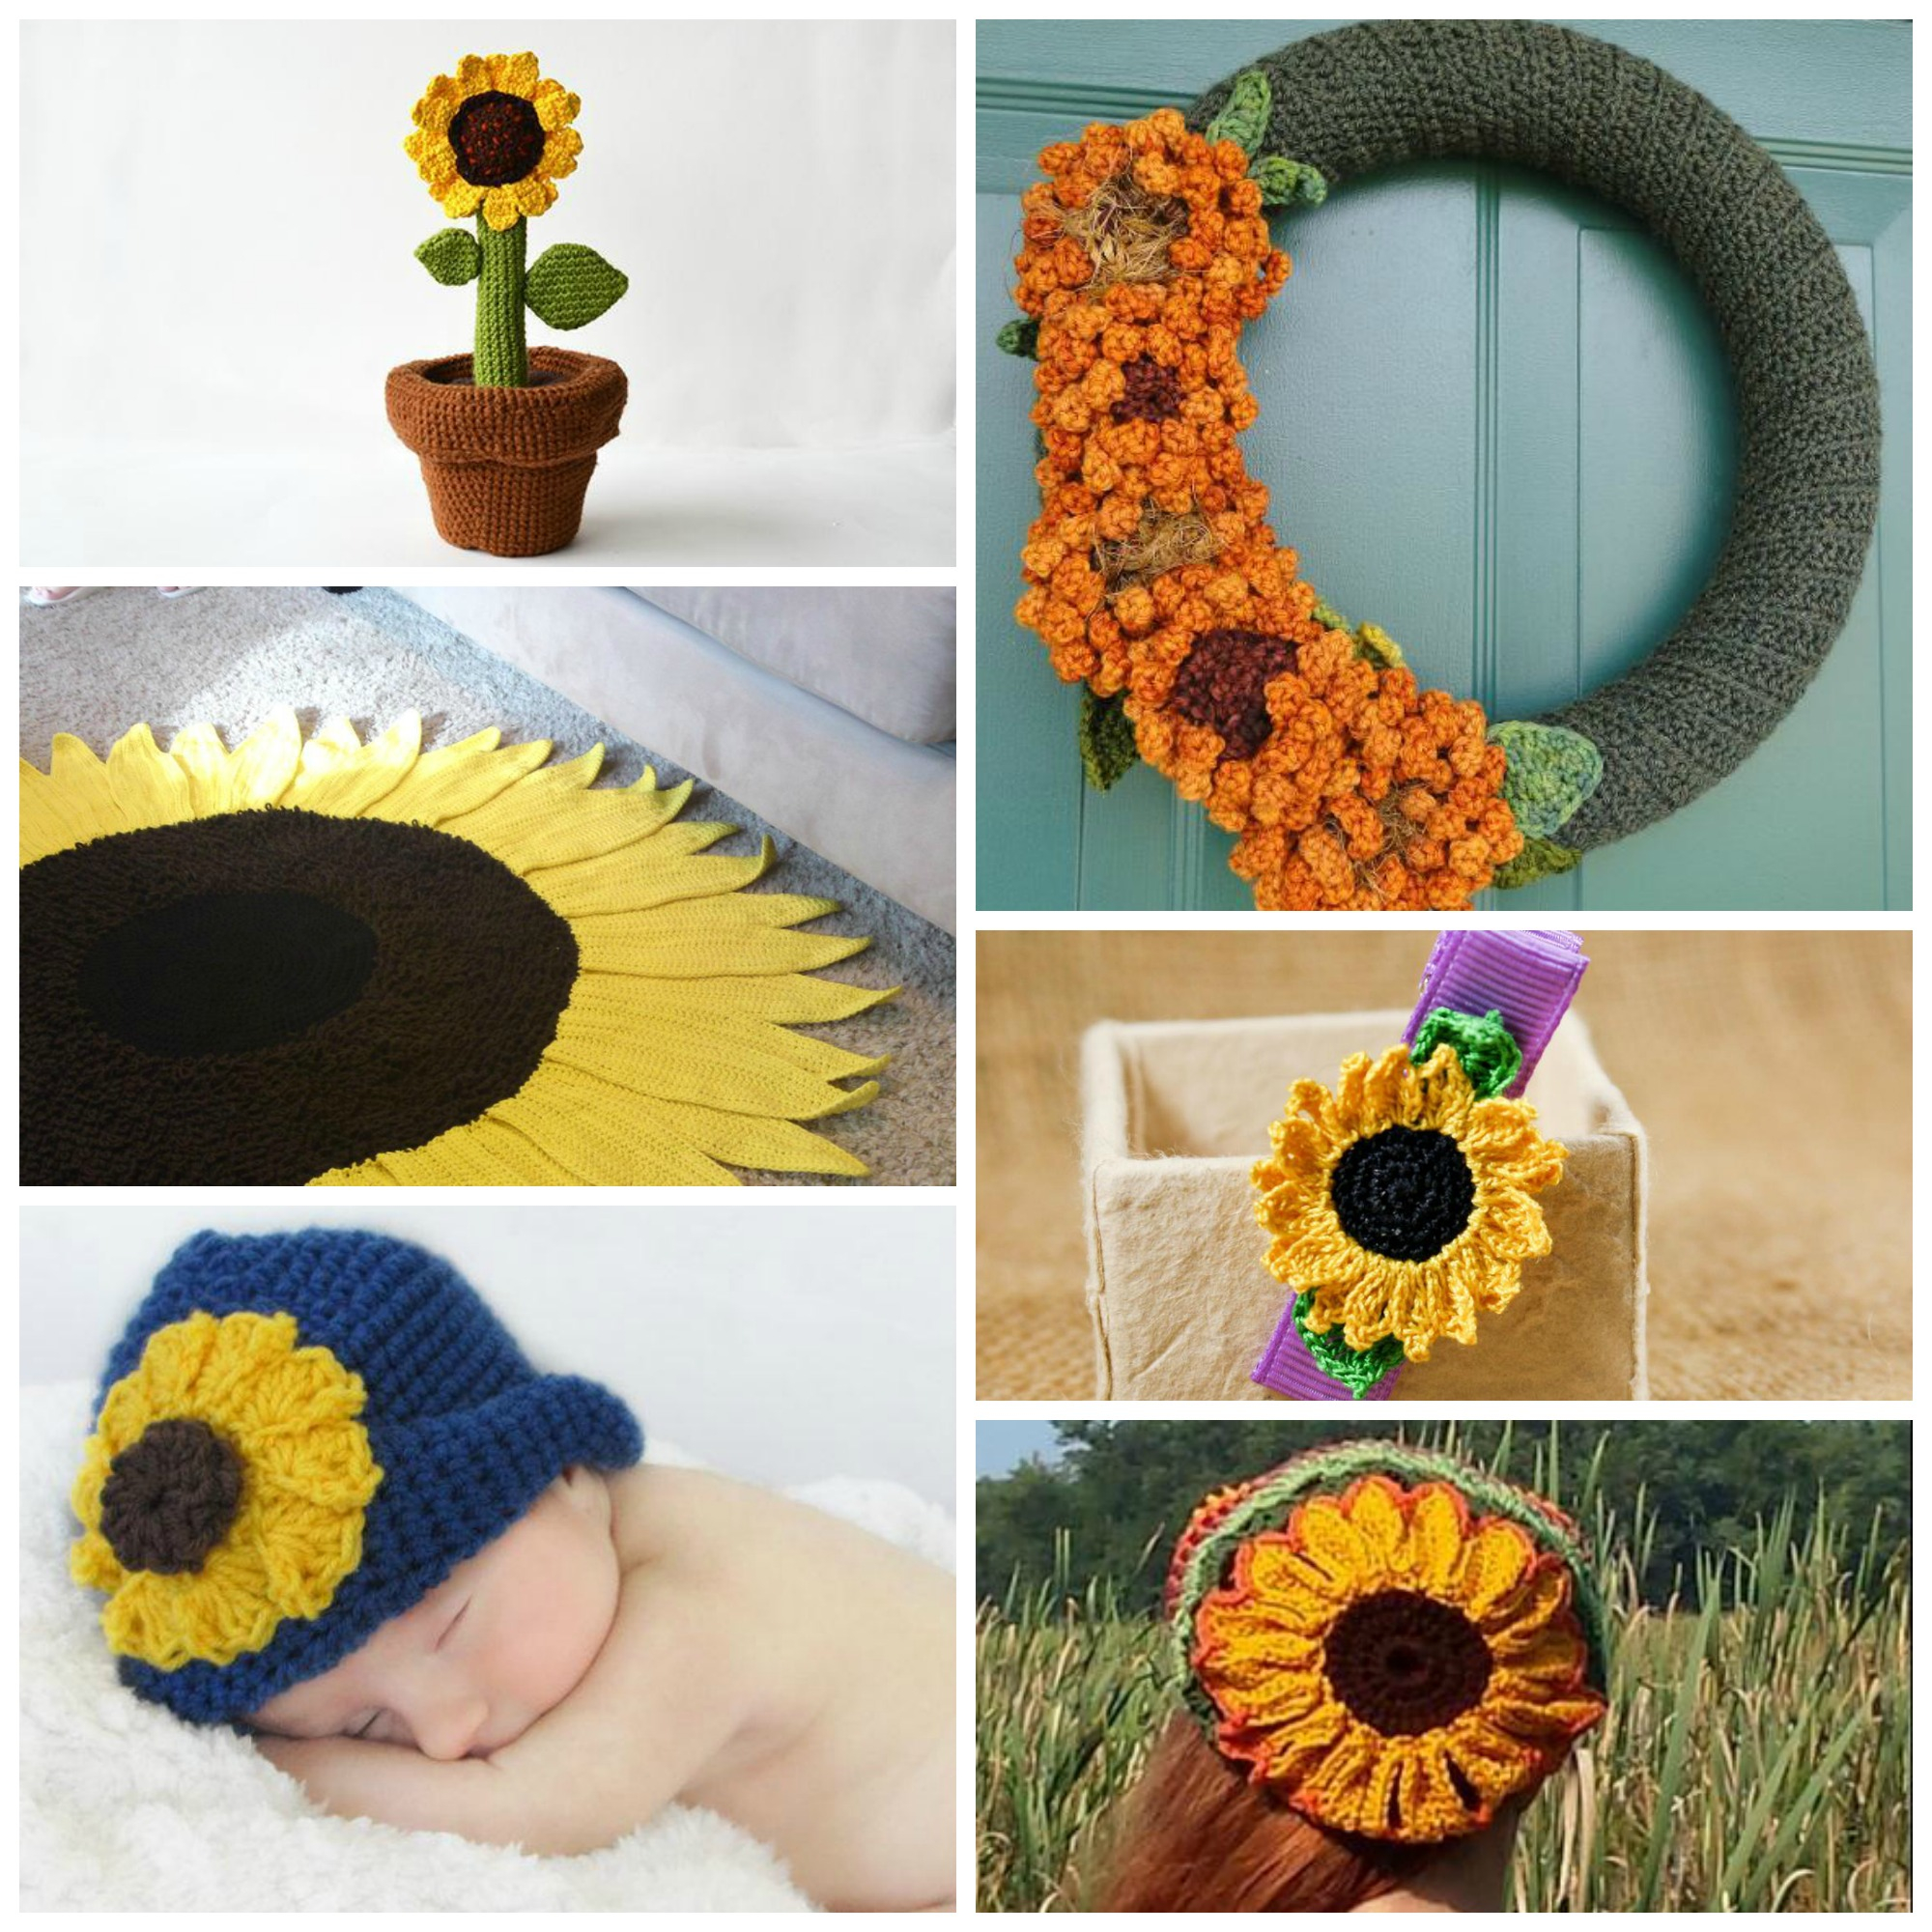 Crochet Sunflower Pattern Crochet Sunflower Patterns To Brighten Up Your Life